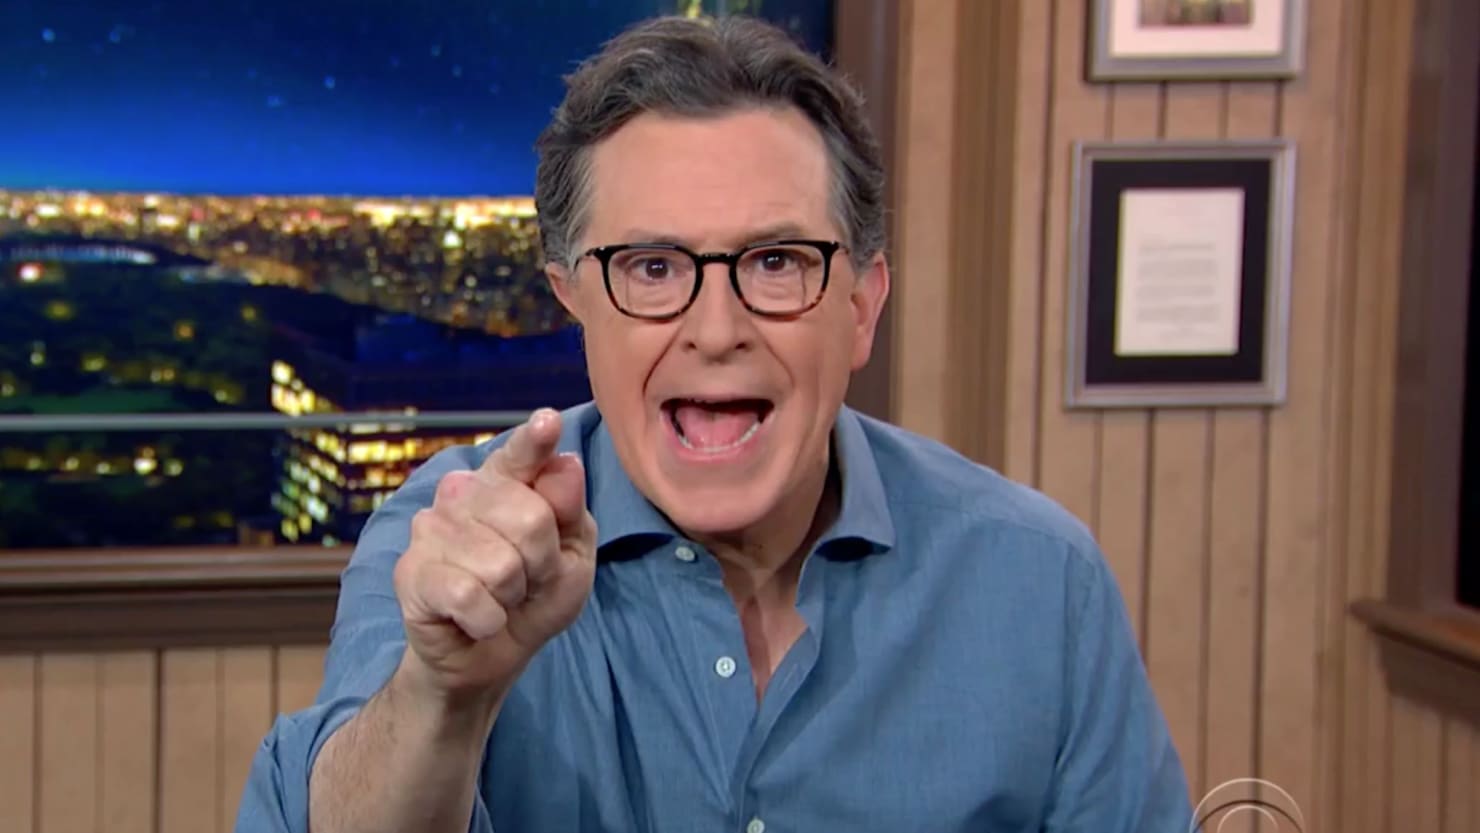 Stephen Colbert rages on Republicans calling for "unity" after the Capitol riot